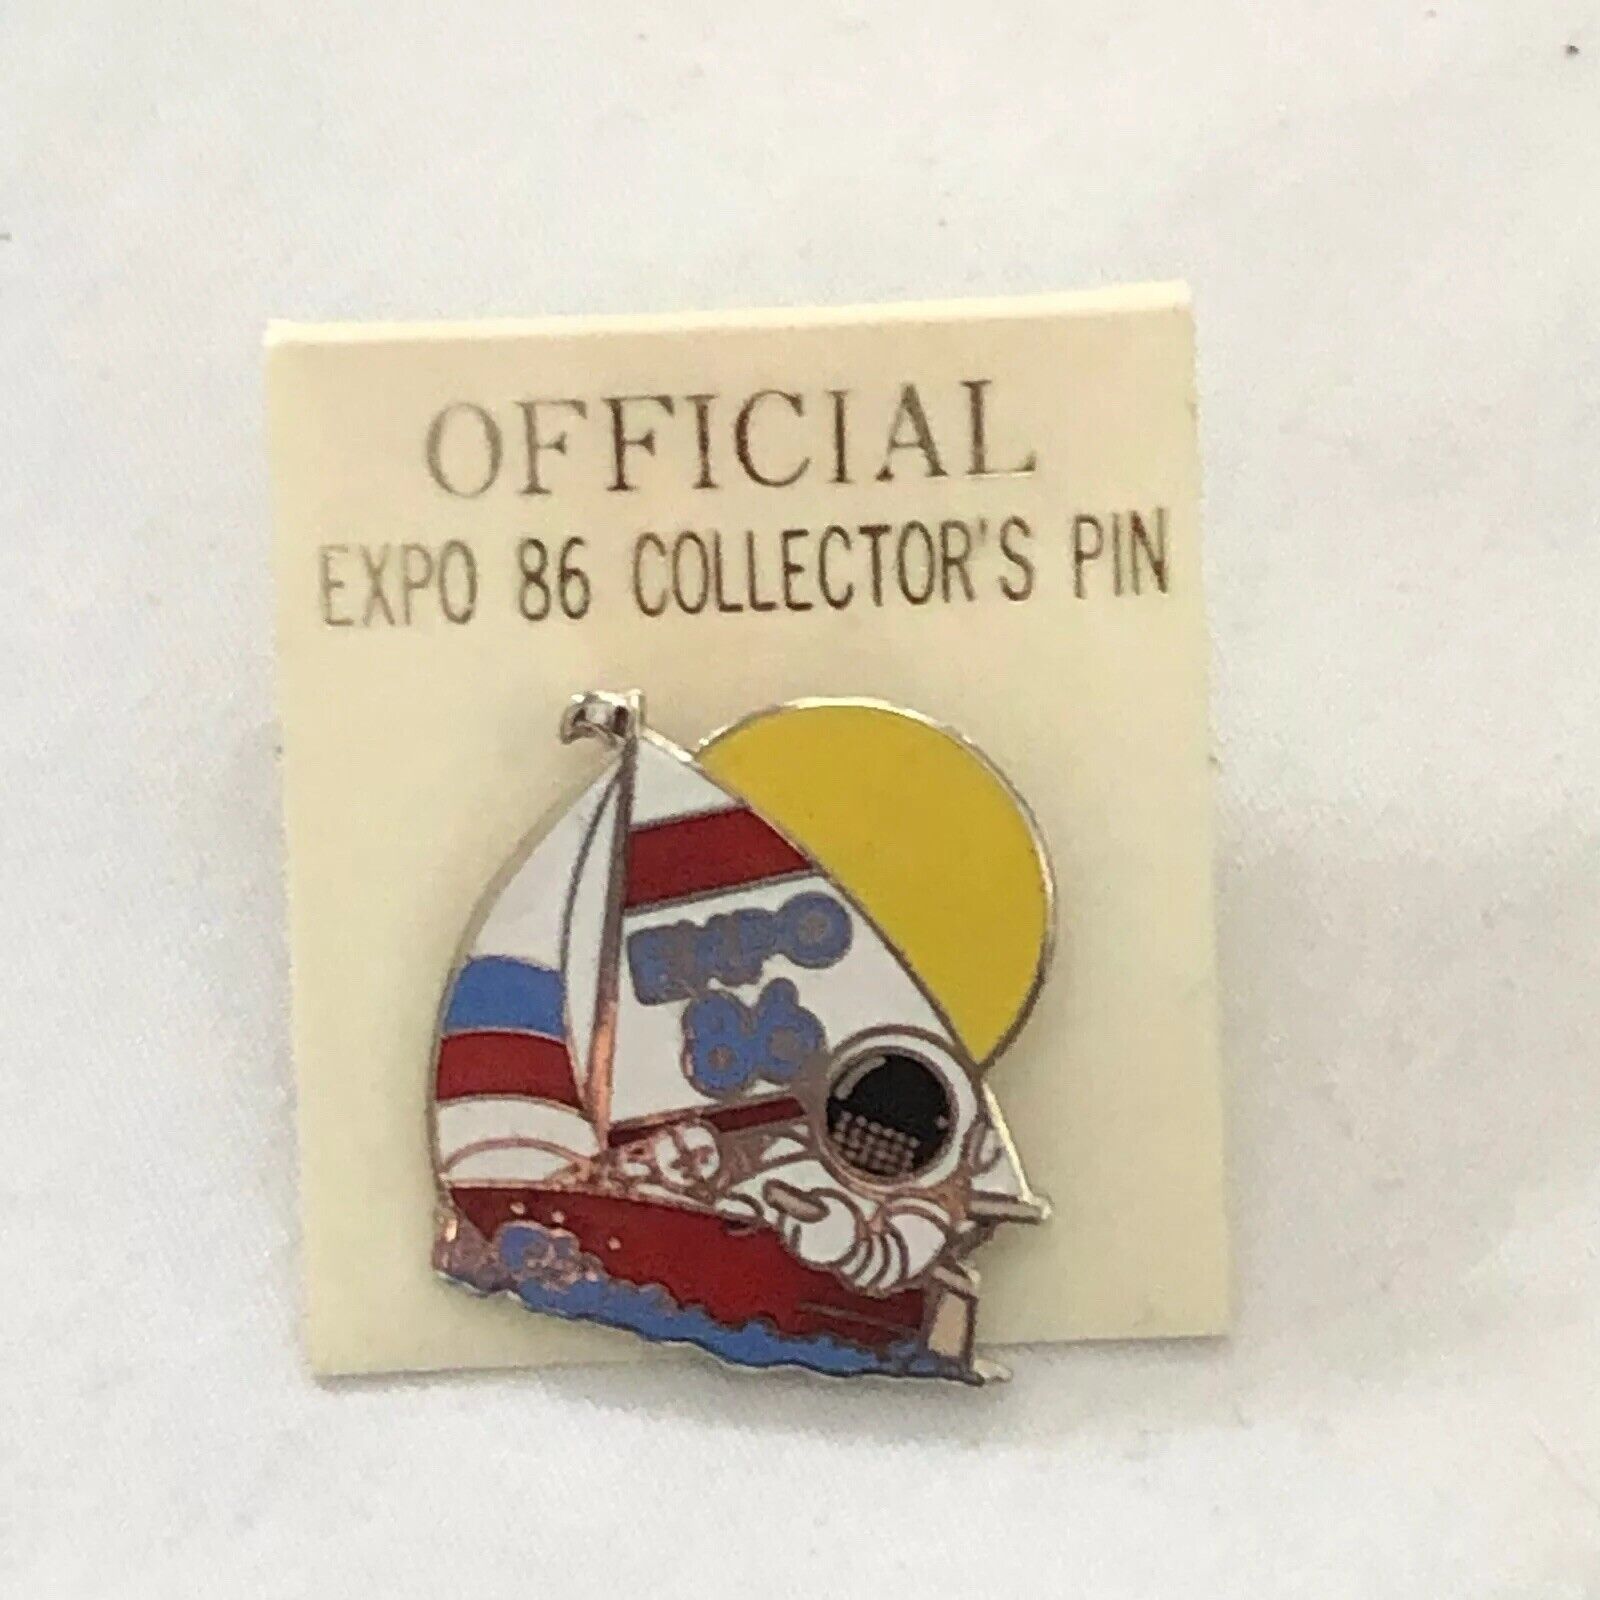 Vintage Expo 86 Collectors Pin Sailboat Brand Official New On Card